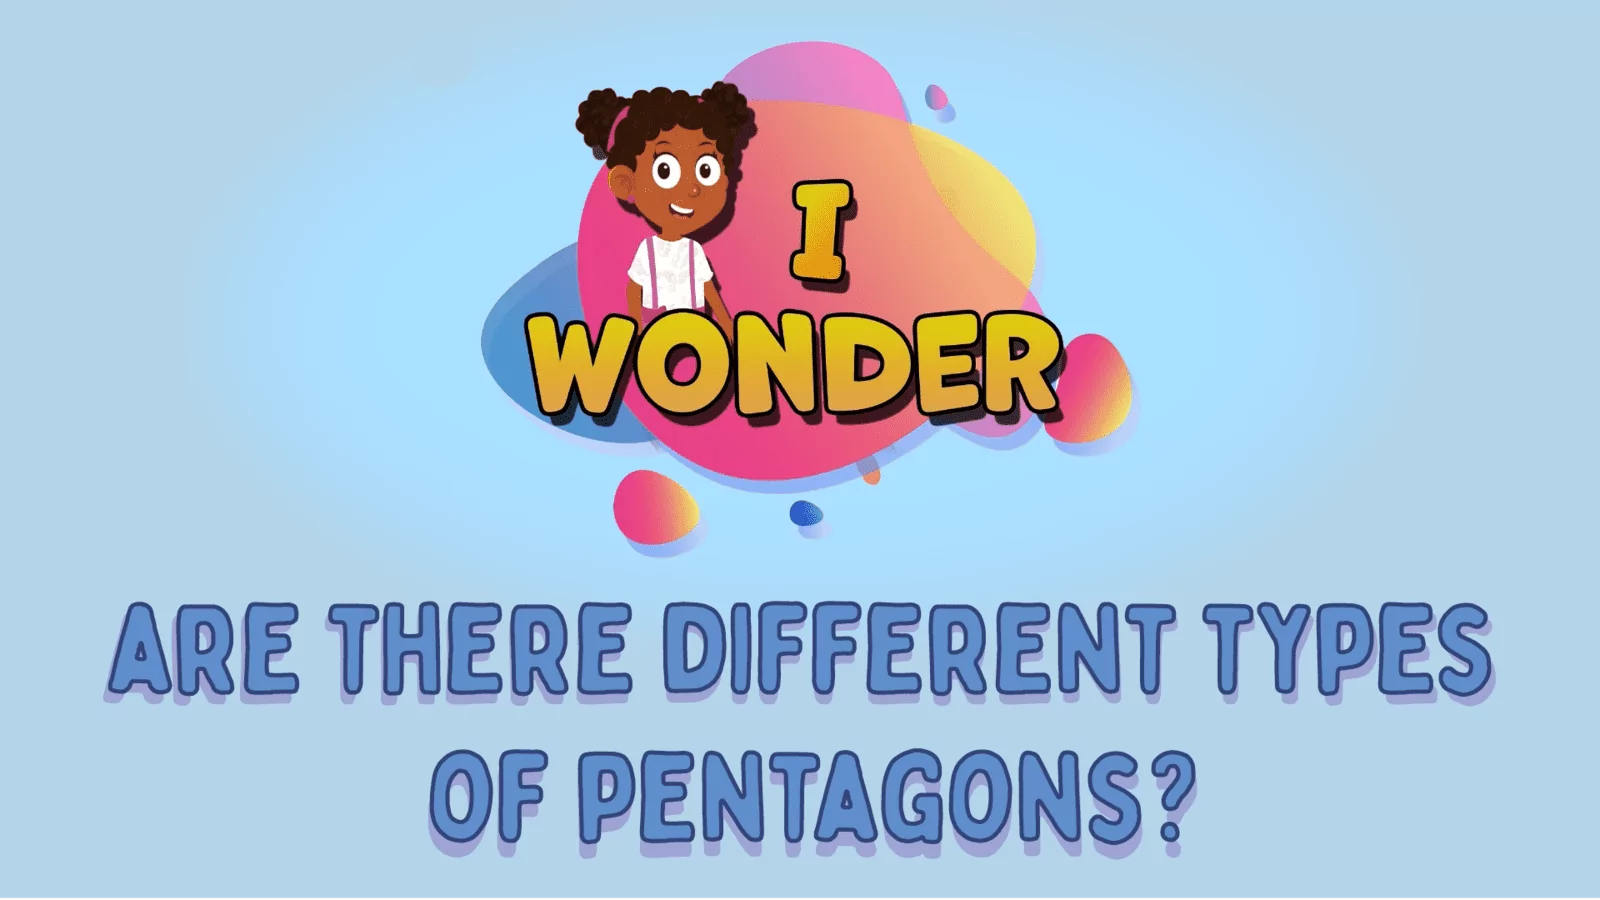 Are There Different Types Of Pentagons?